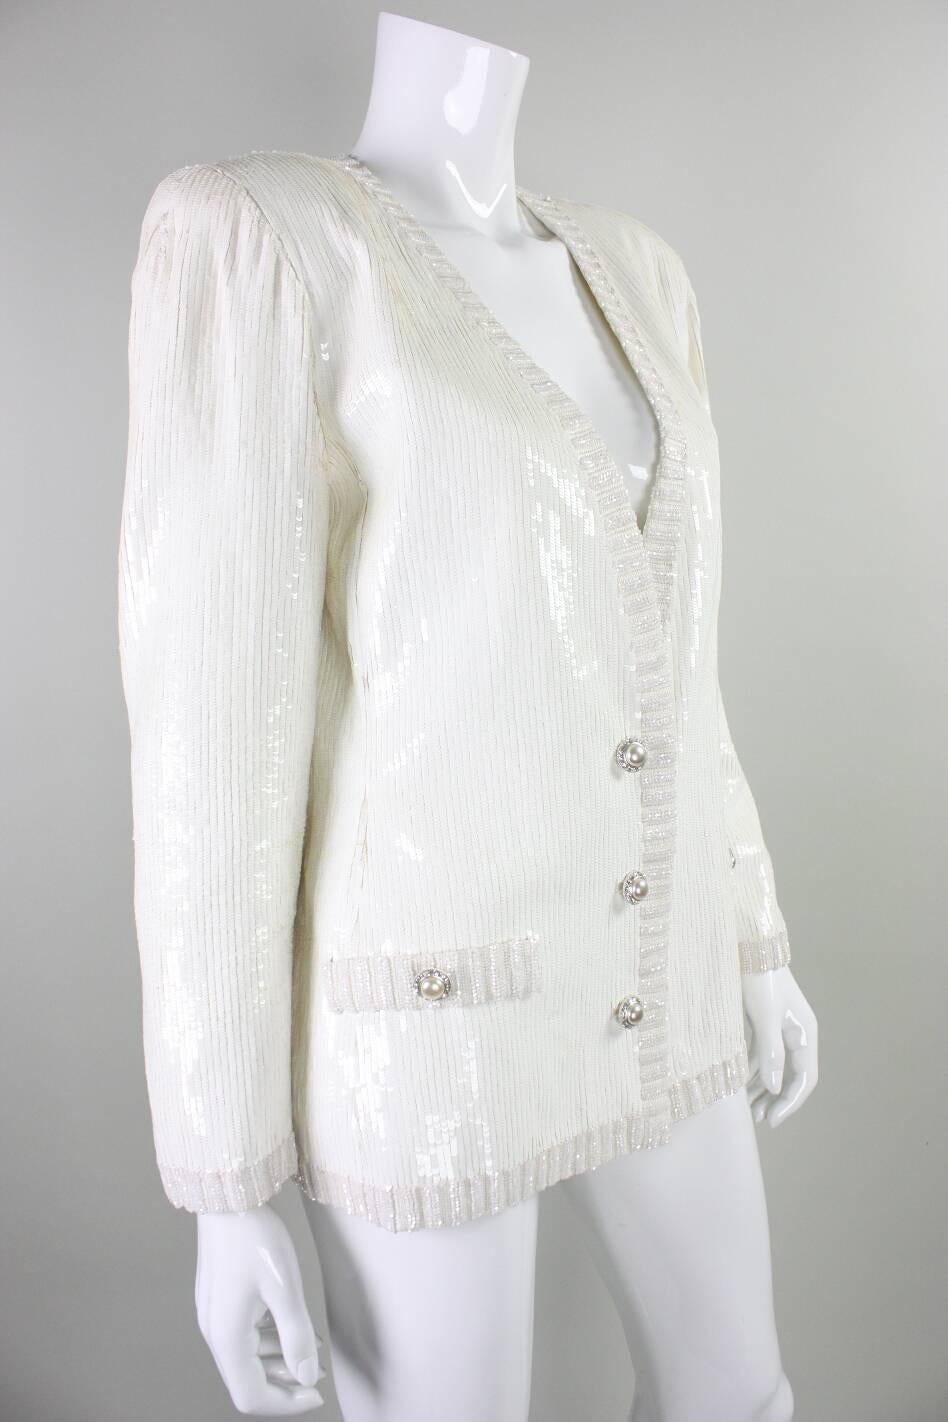 Vintage jacket from Bill Blass dates to the 1980's and features all over white sequins and faux pockets and faux button closures.  This jacket retailed at Amen Wardy.  Three hook and eye closures at center front waist.  Vintage size